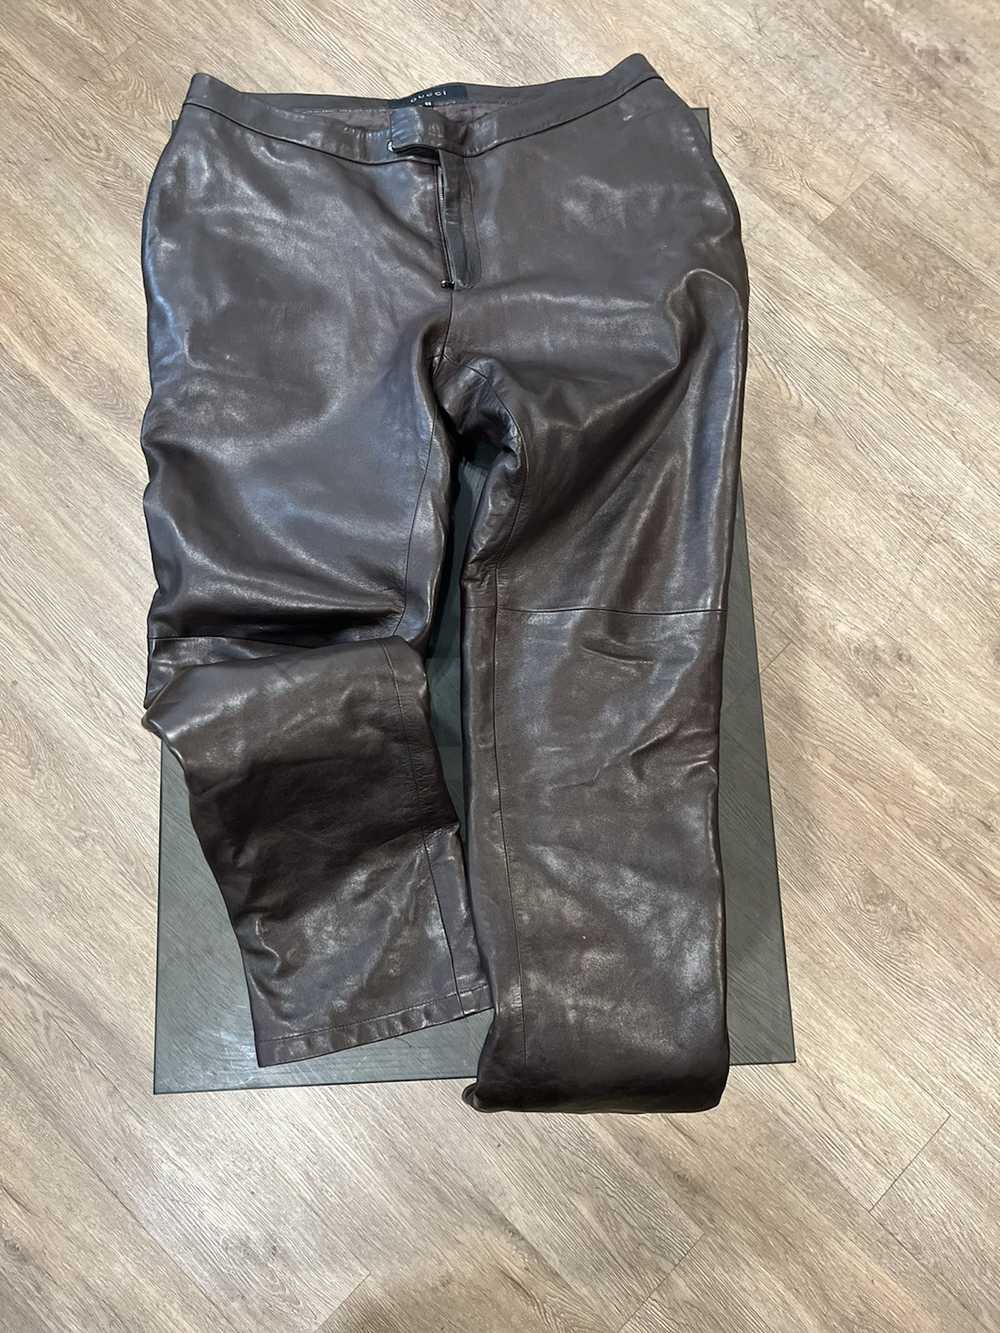 Gucci Gucci Chocolate Brown Leather Pants - image 4